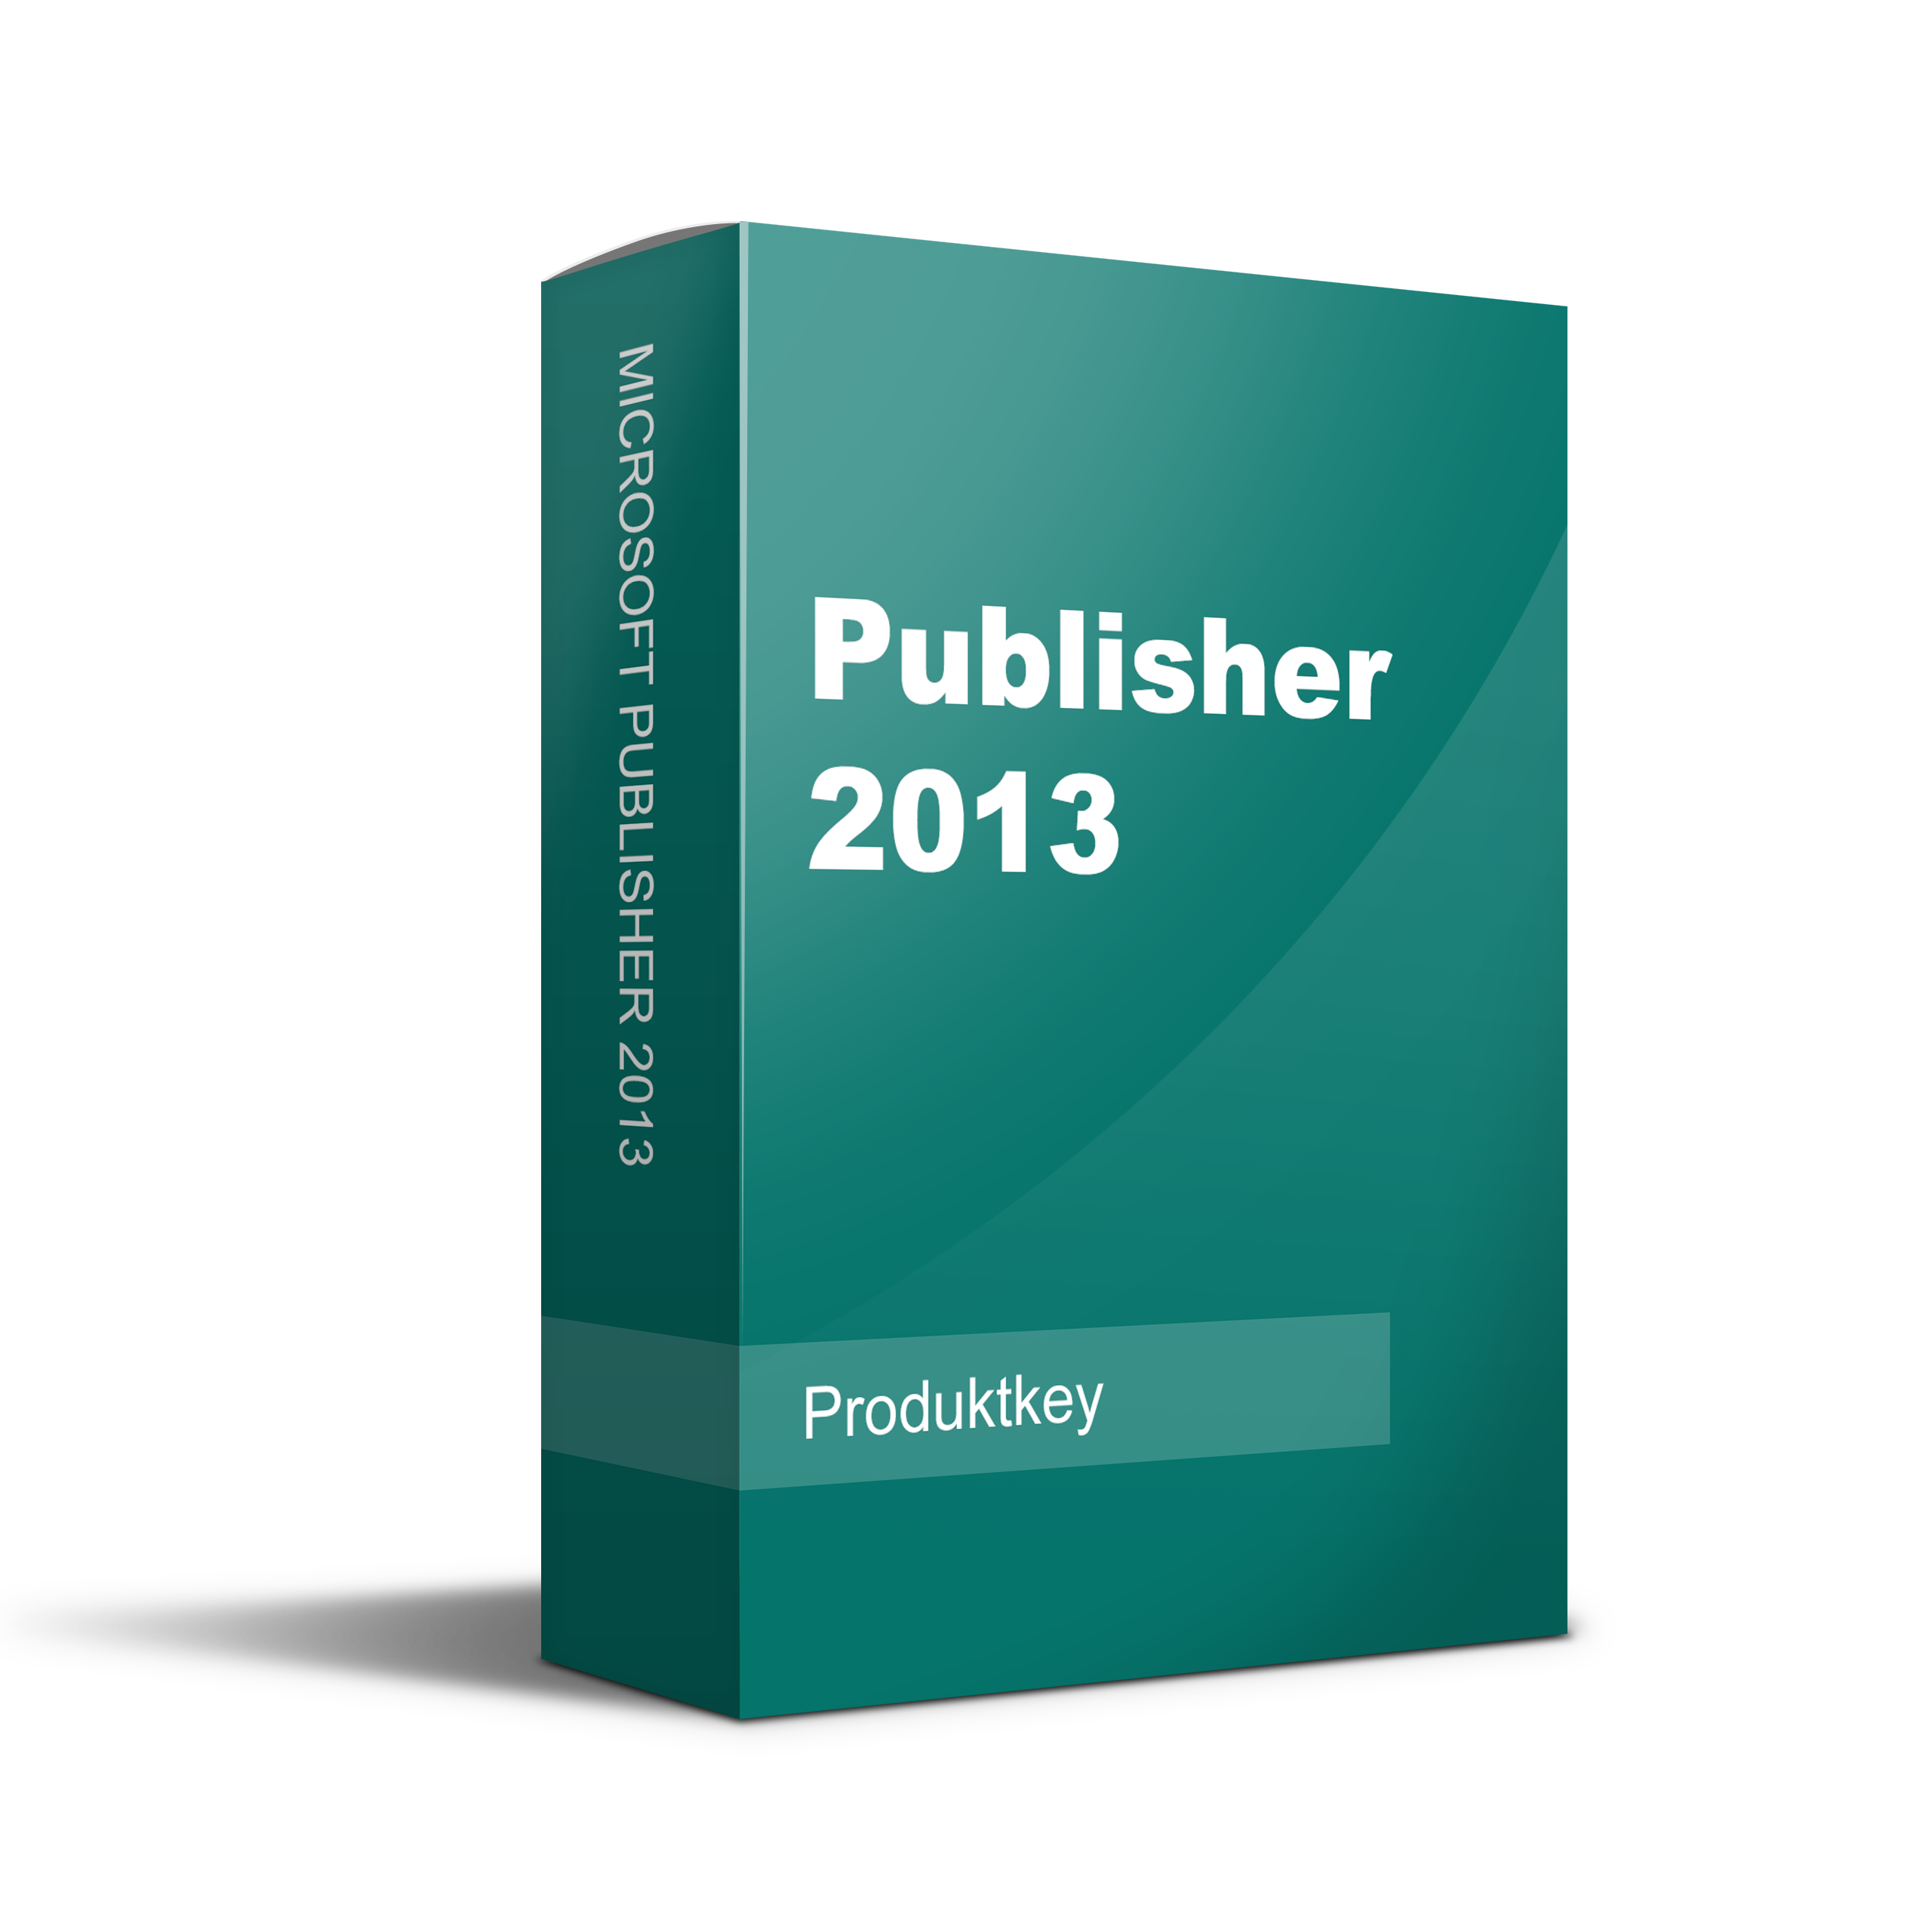 microsoft publisher 2013 free download